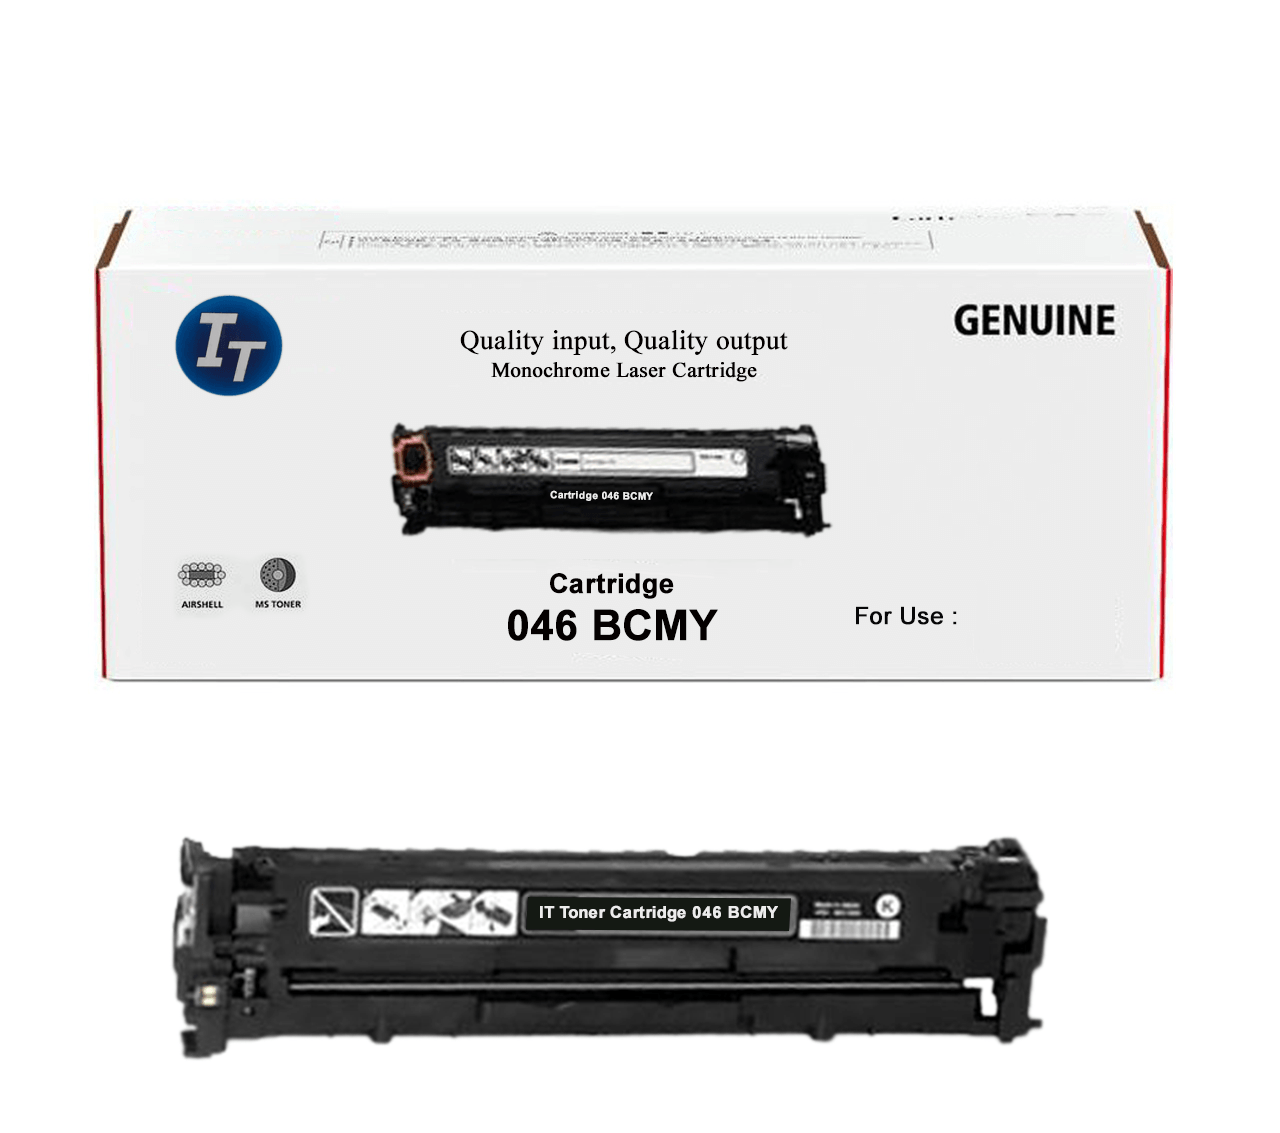 IT Toner Cartridge Canon 046 BCMY (7).png